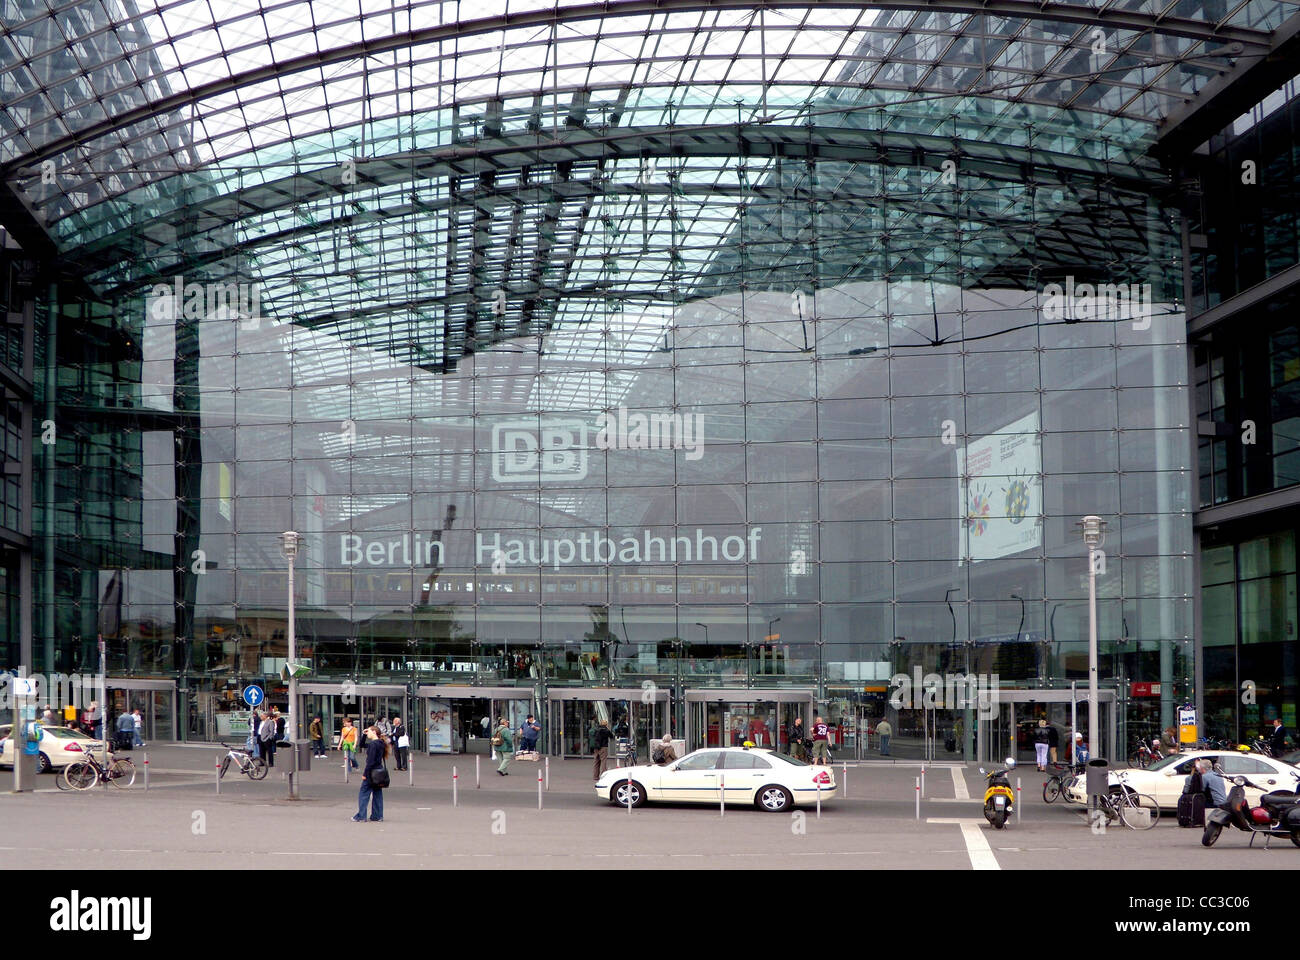 Central train station of Berlin. Stock Photo